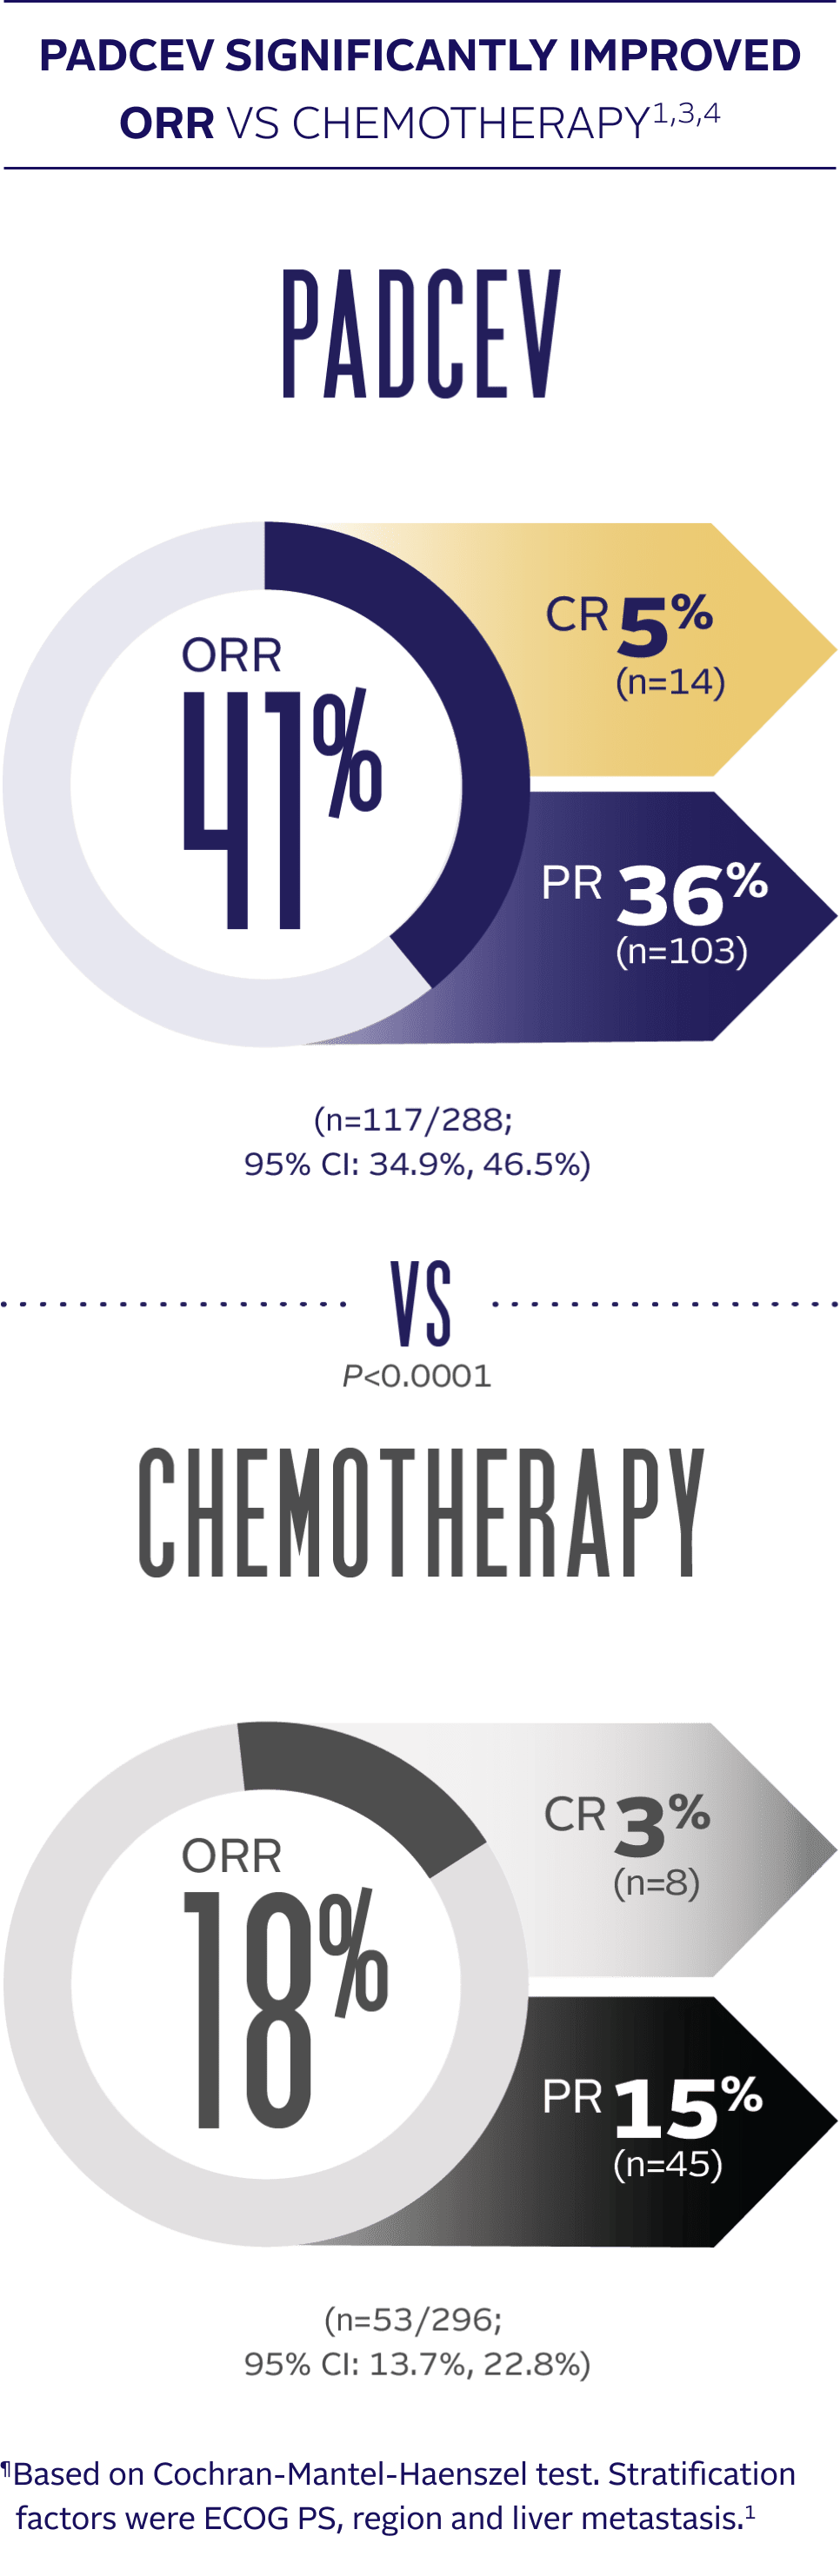 PADCEV overall response rate = 41%, complete response = 5%, partial response = 36%. Chemotherapy overall response rate = 18%, complete response = 3%, partial response = 15%.